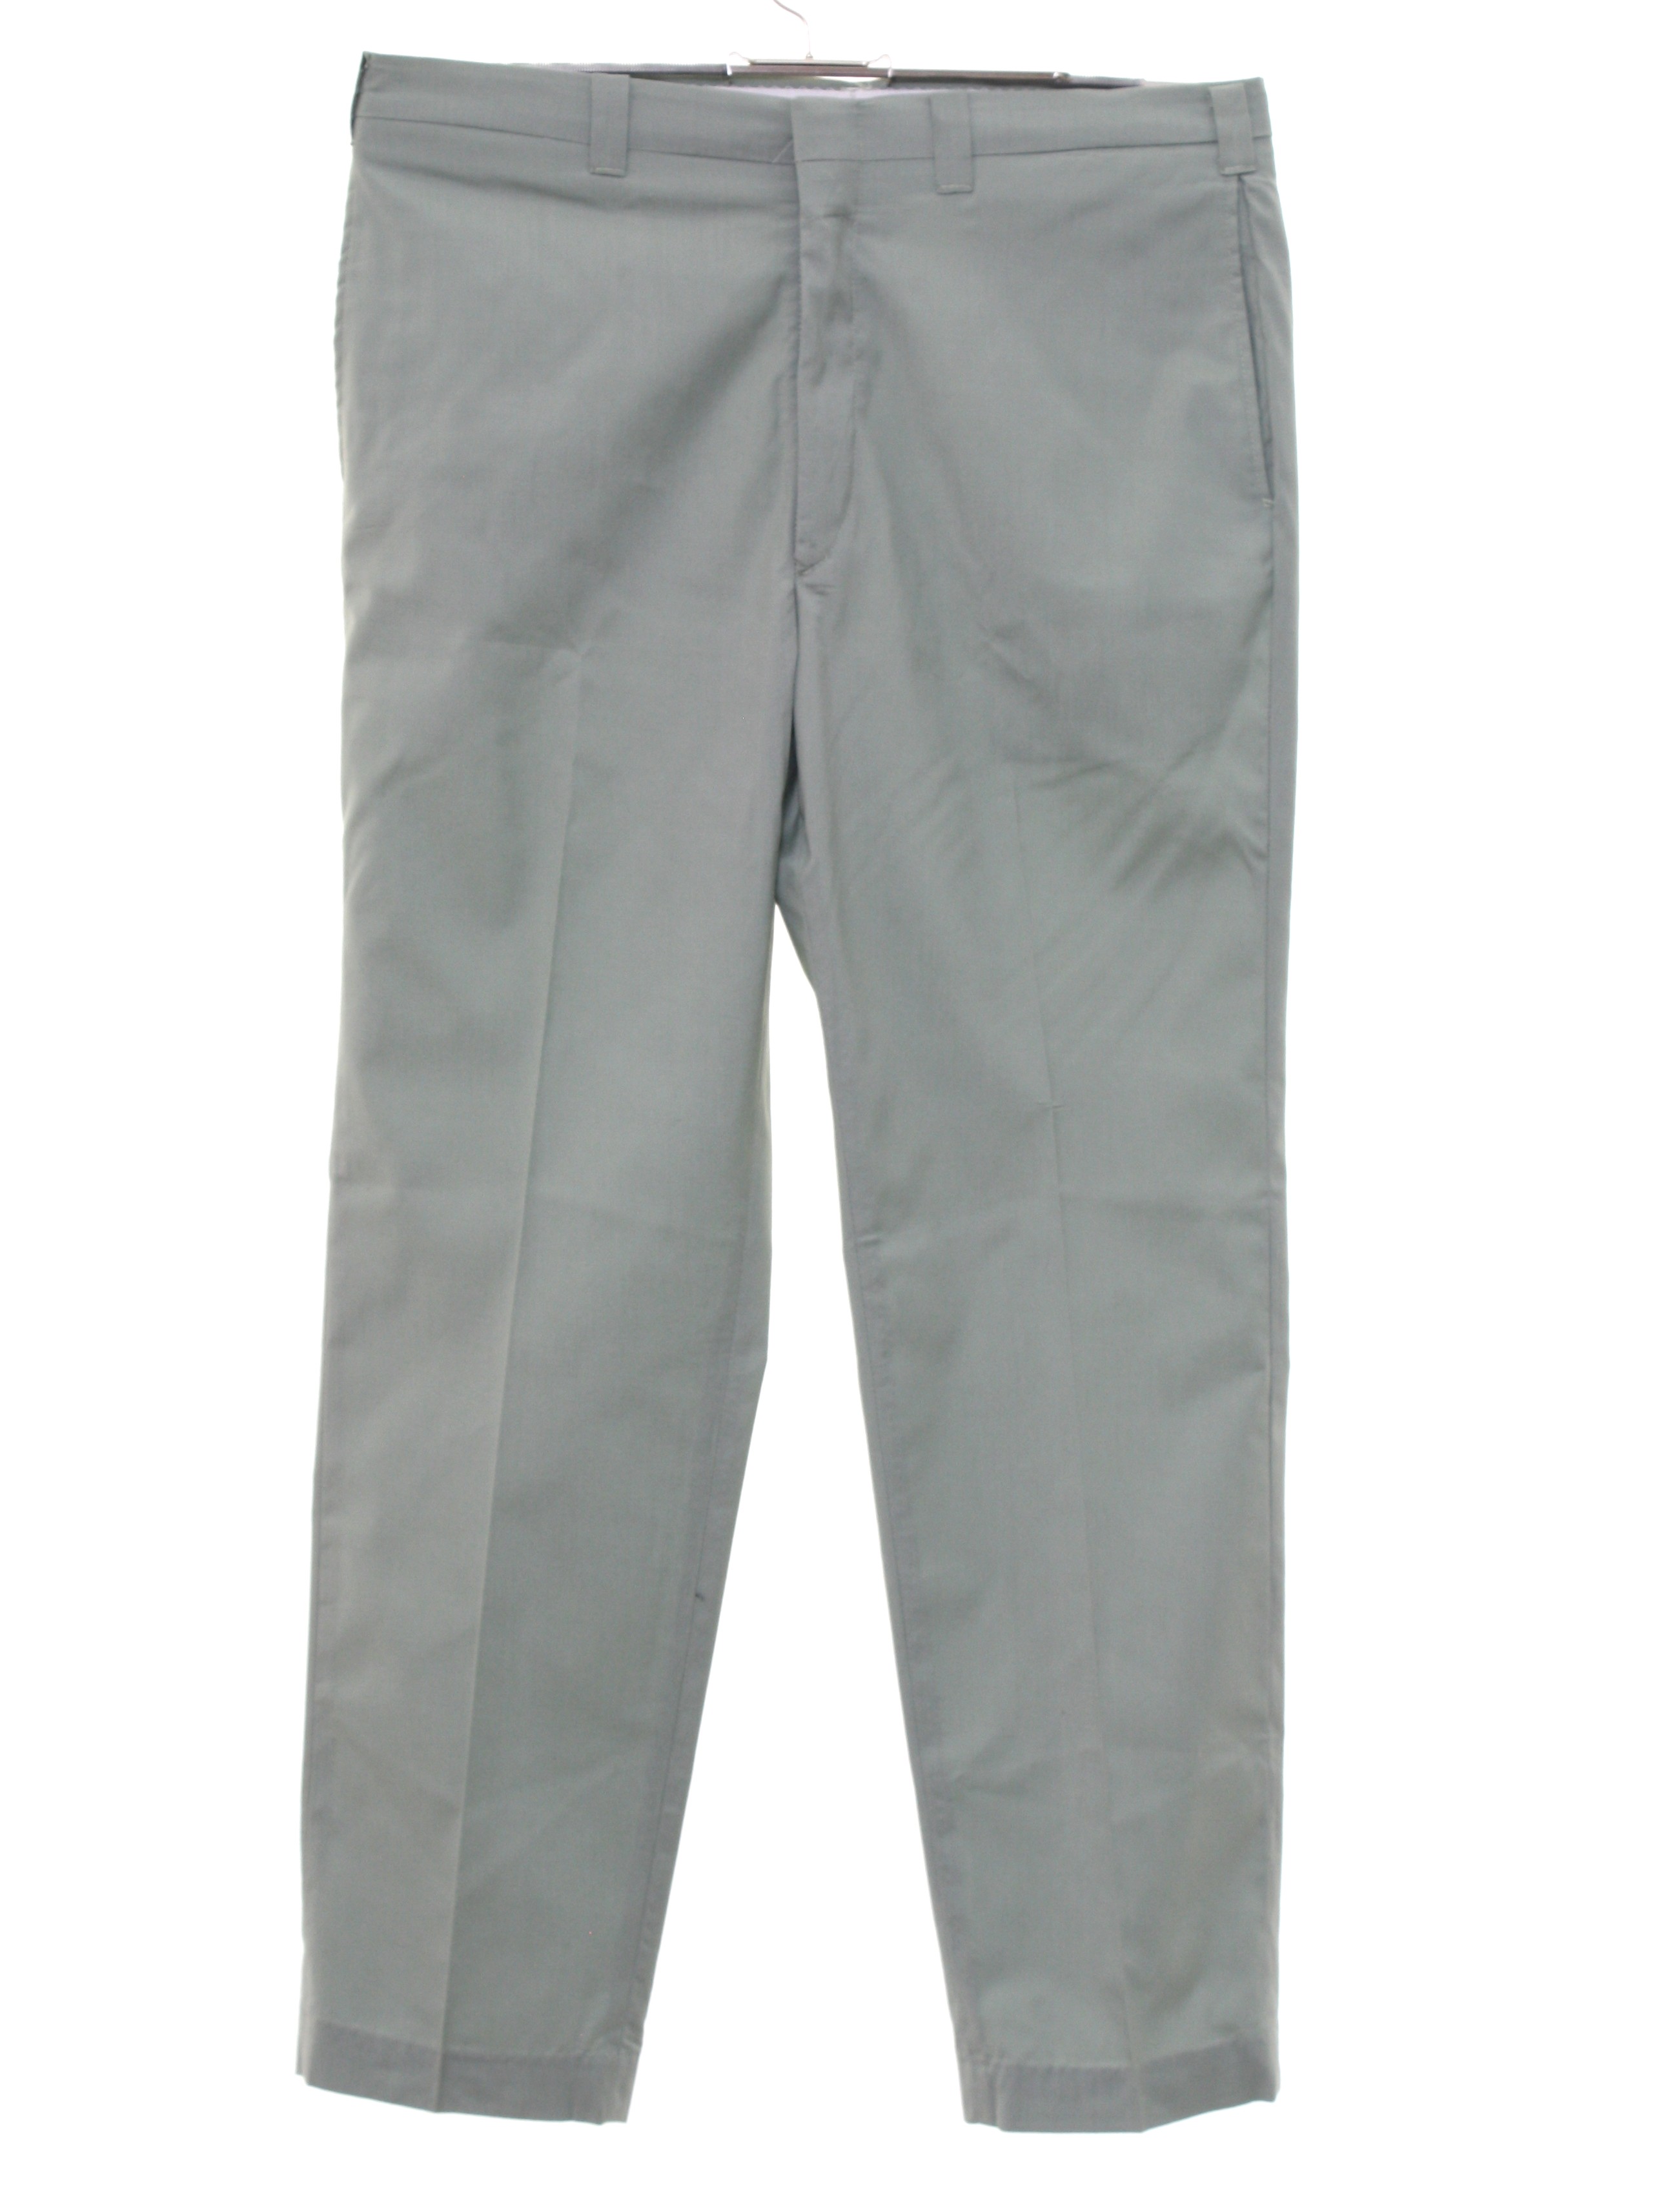 Retro 1960s Pants: Early 60s -Orvis Fishing Tackle- Mens light gray ...